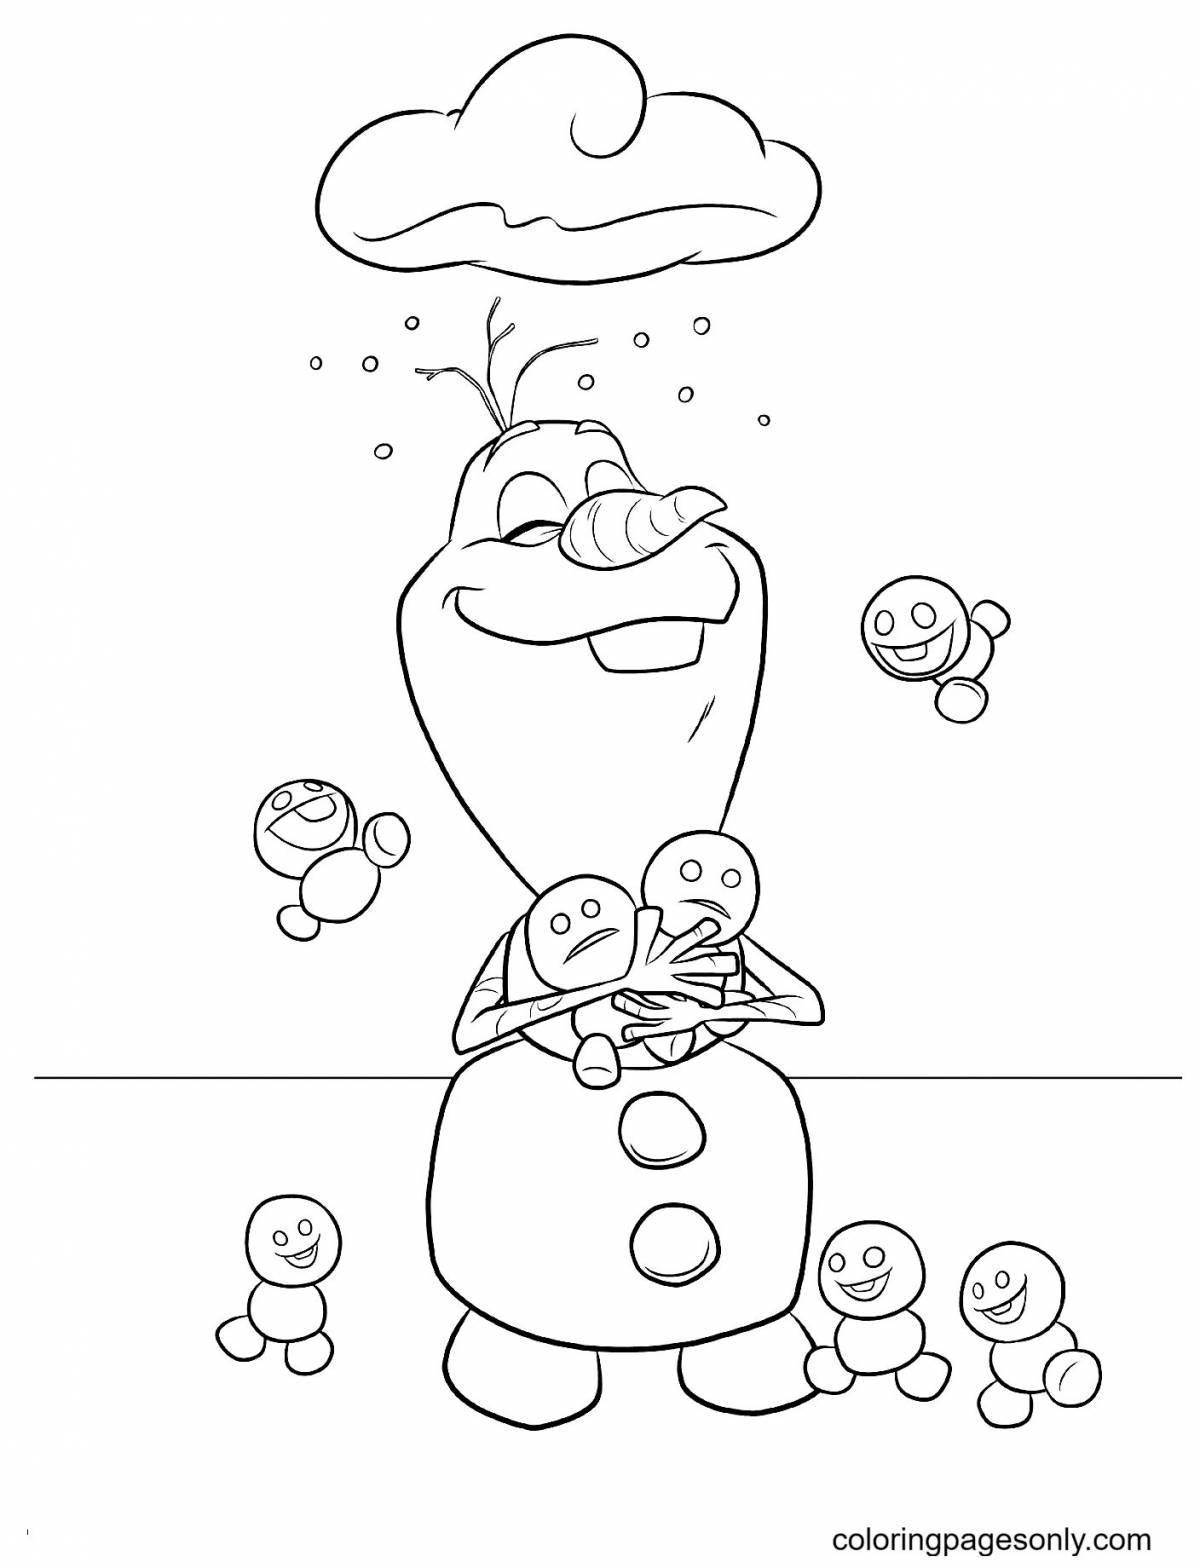 Olaf the playful snowman coloring page